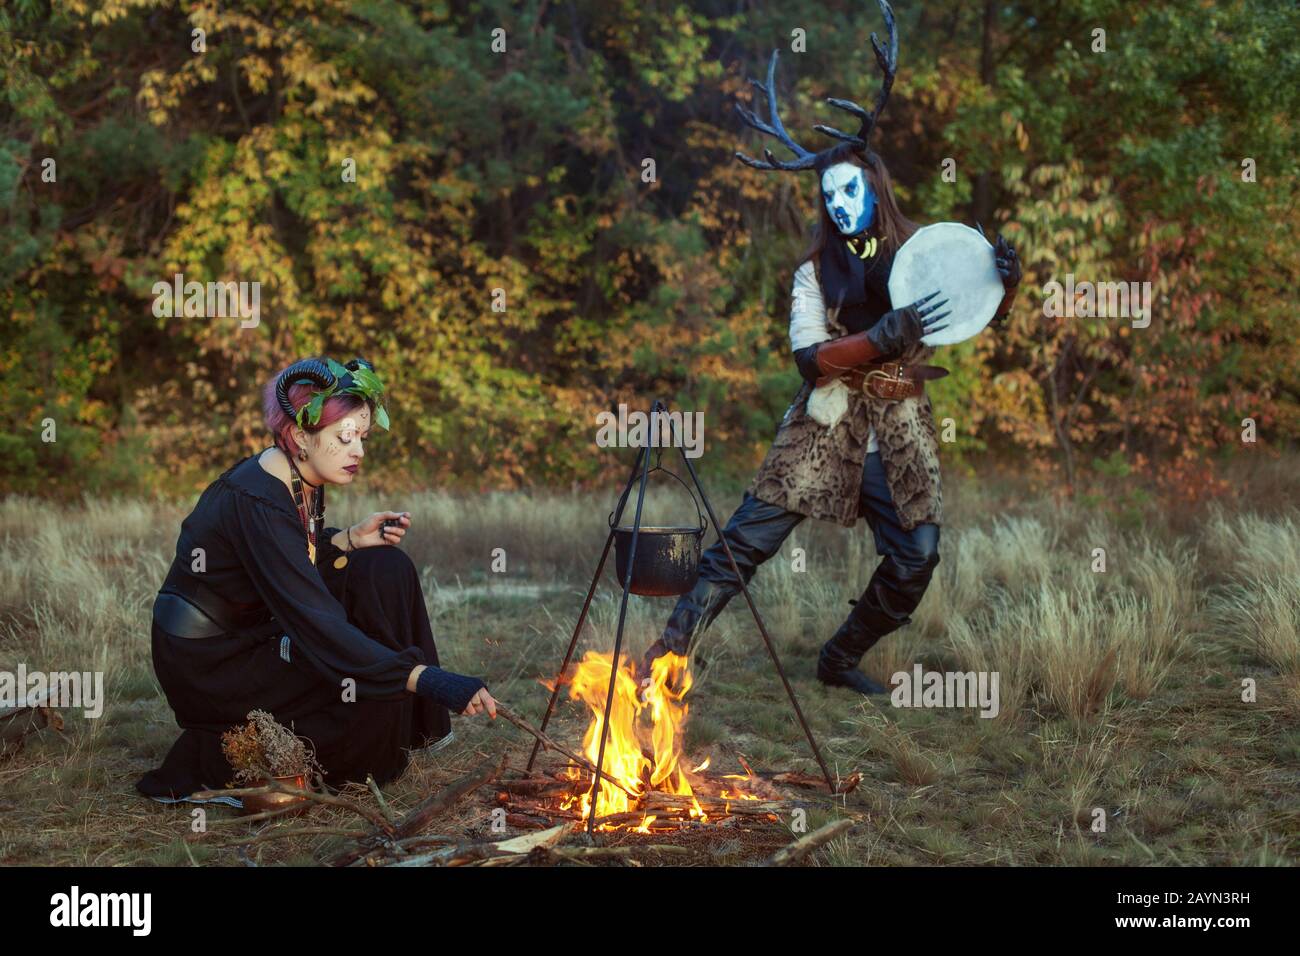 Shamans conjure in the forest. They are preparing a magic potion at the stake. Stock Photo